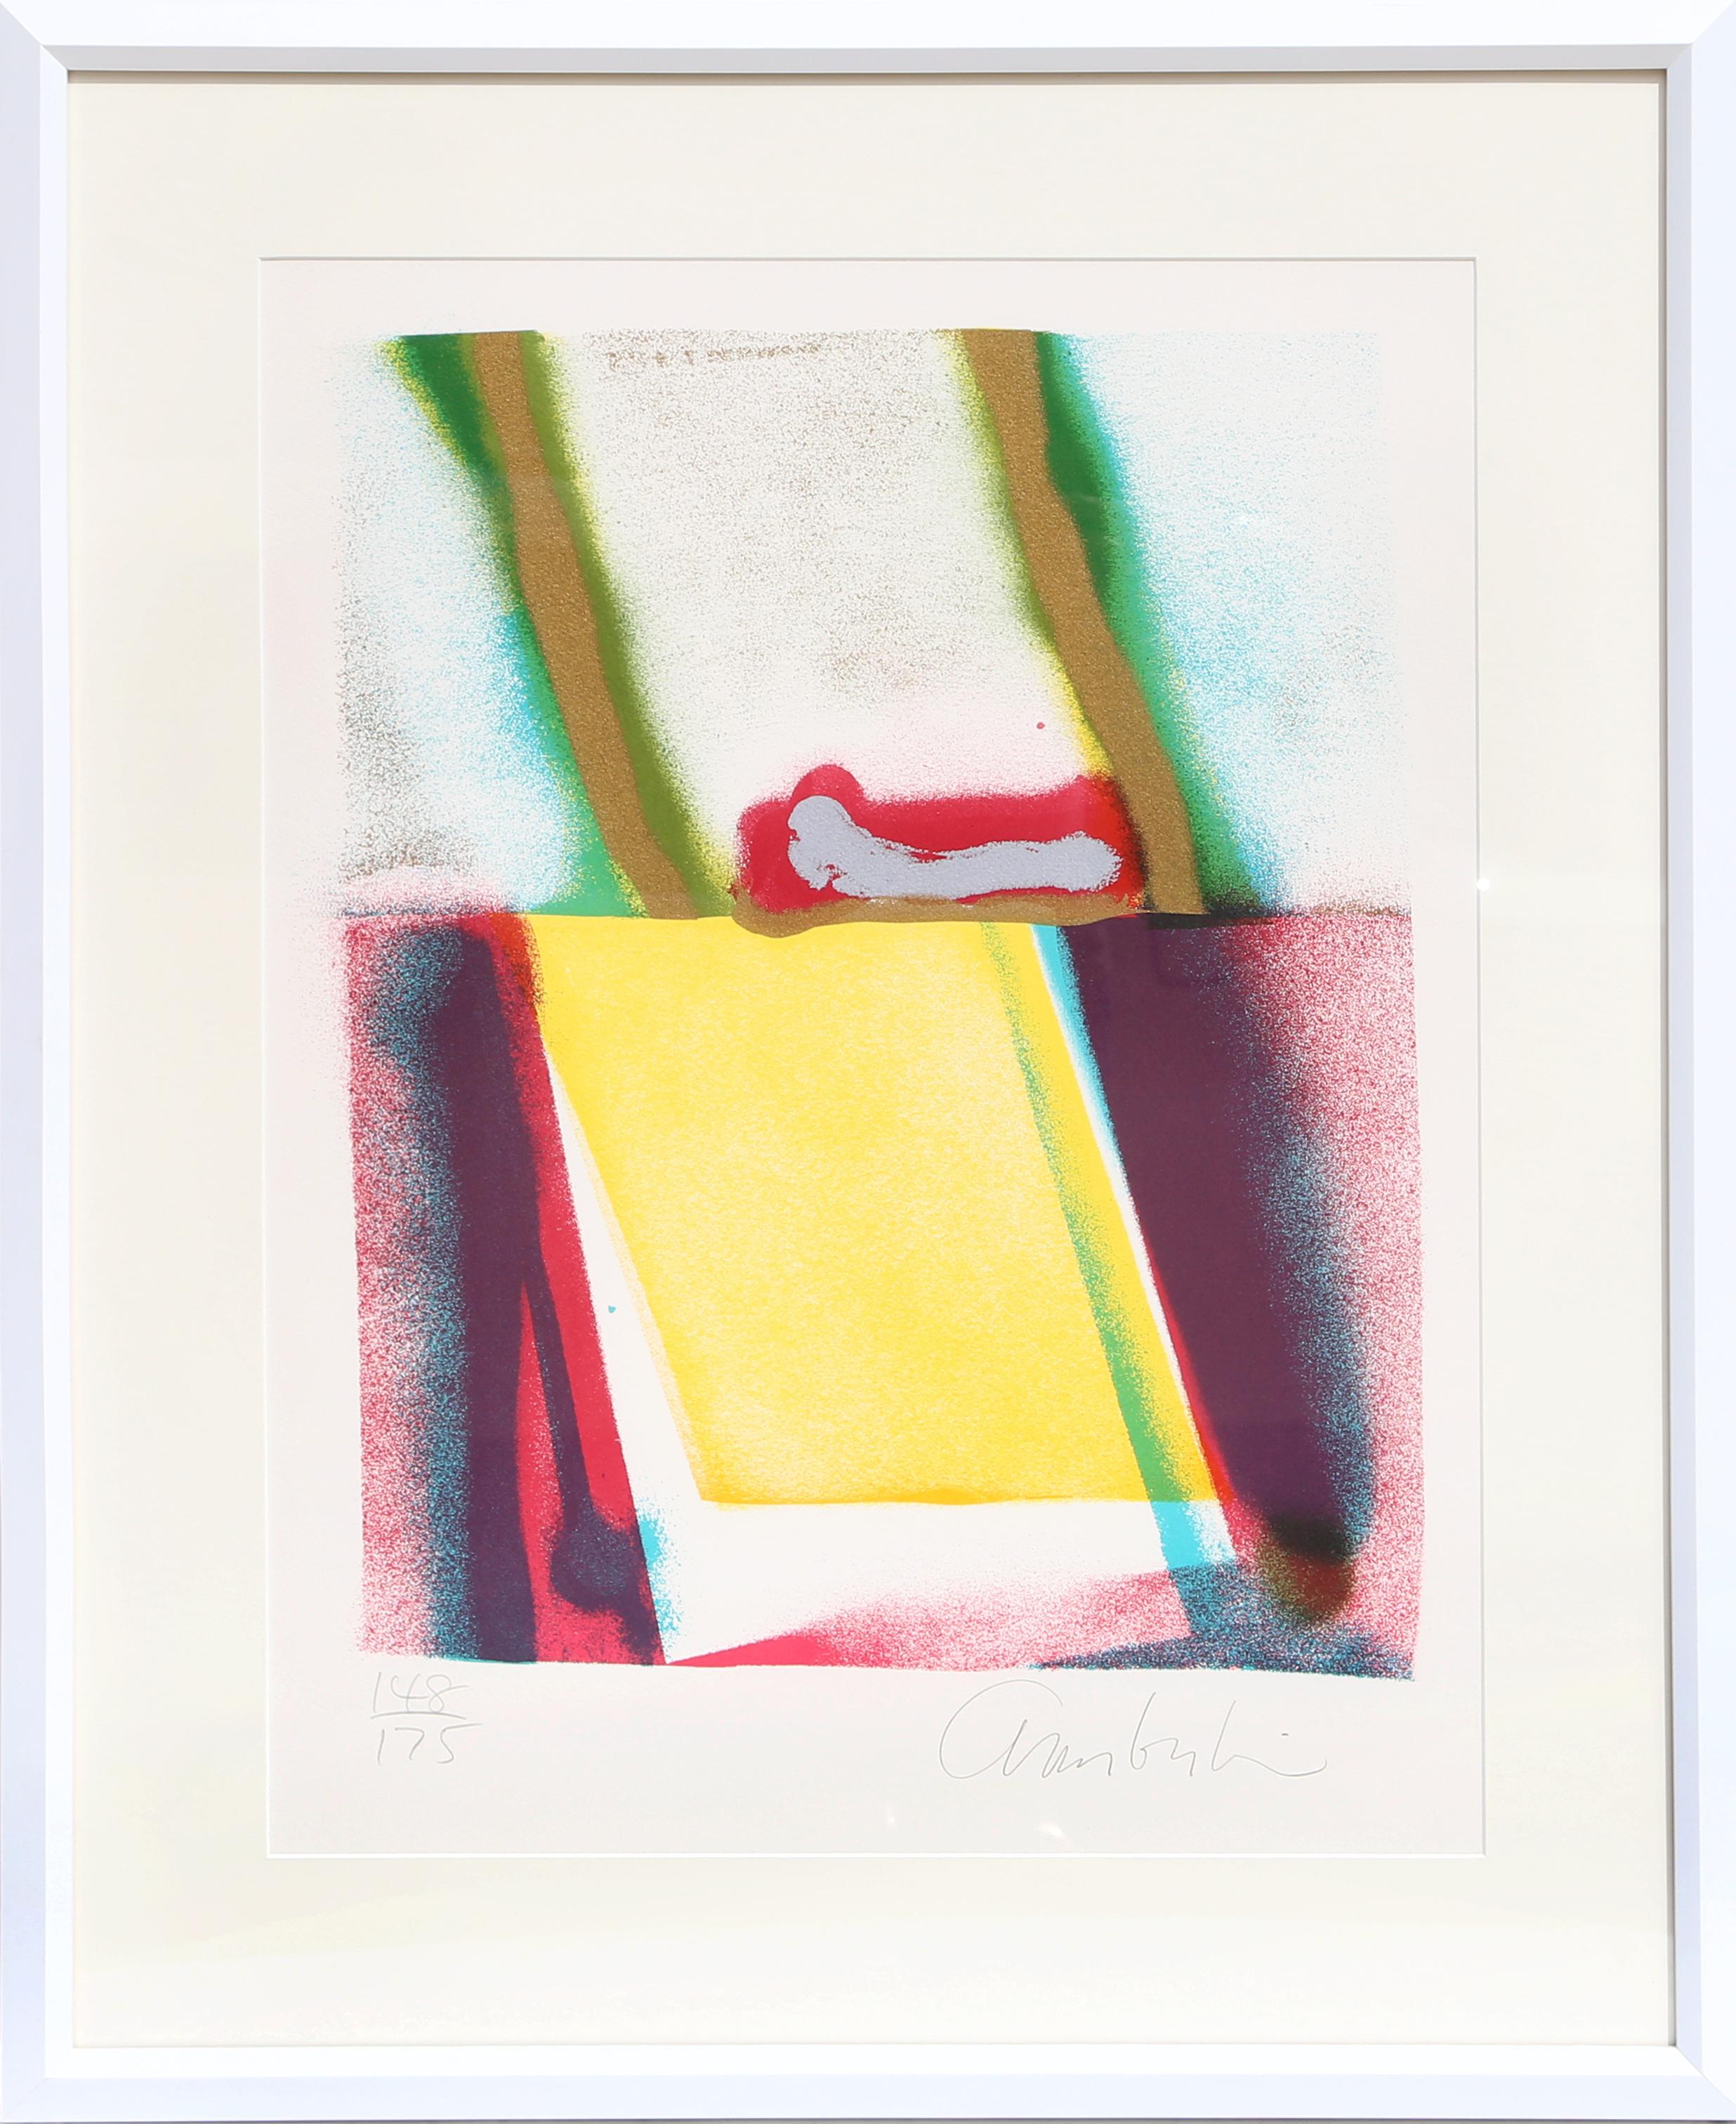 Artist: John Chamberlain
Title: Flashback V
Year: 1981
Medium: Lithograph, signed and numbered in pencil 
Edition: 175
Paper Size: 28 x 20 inches 
Frame Size: 31.5 x 25 inches